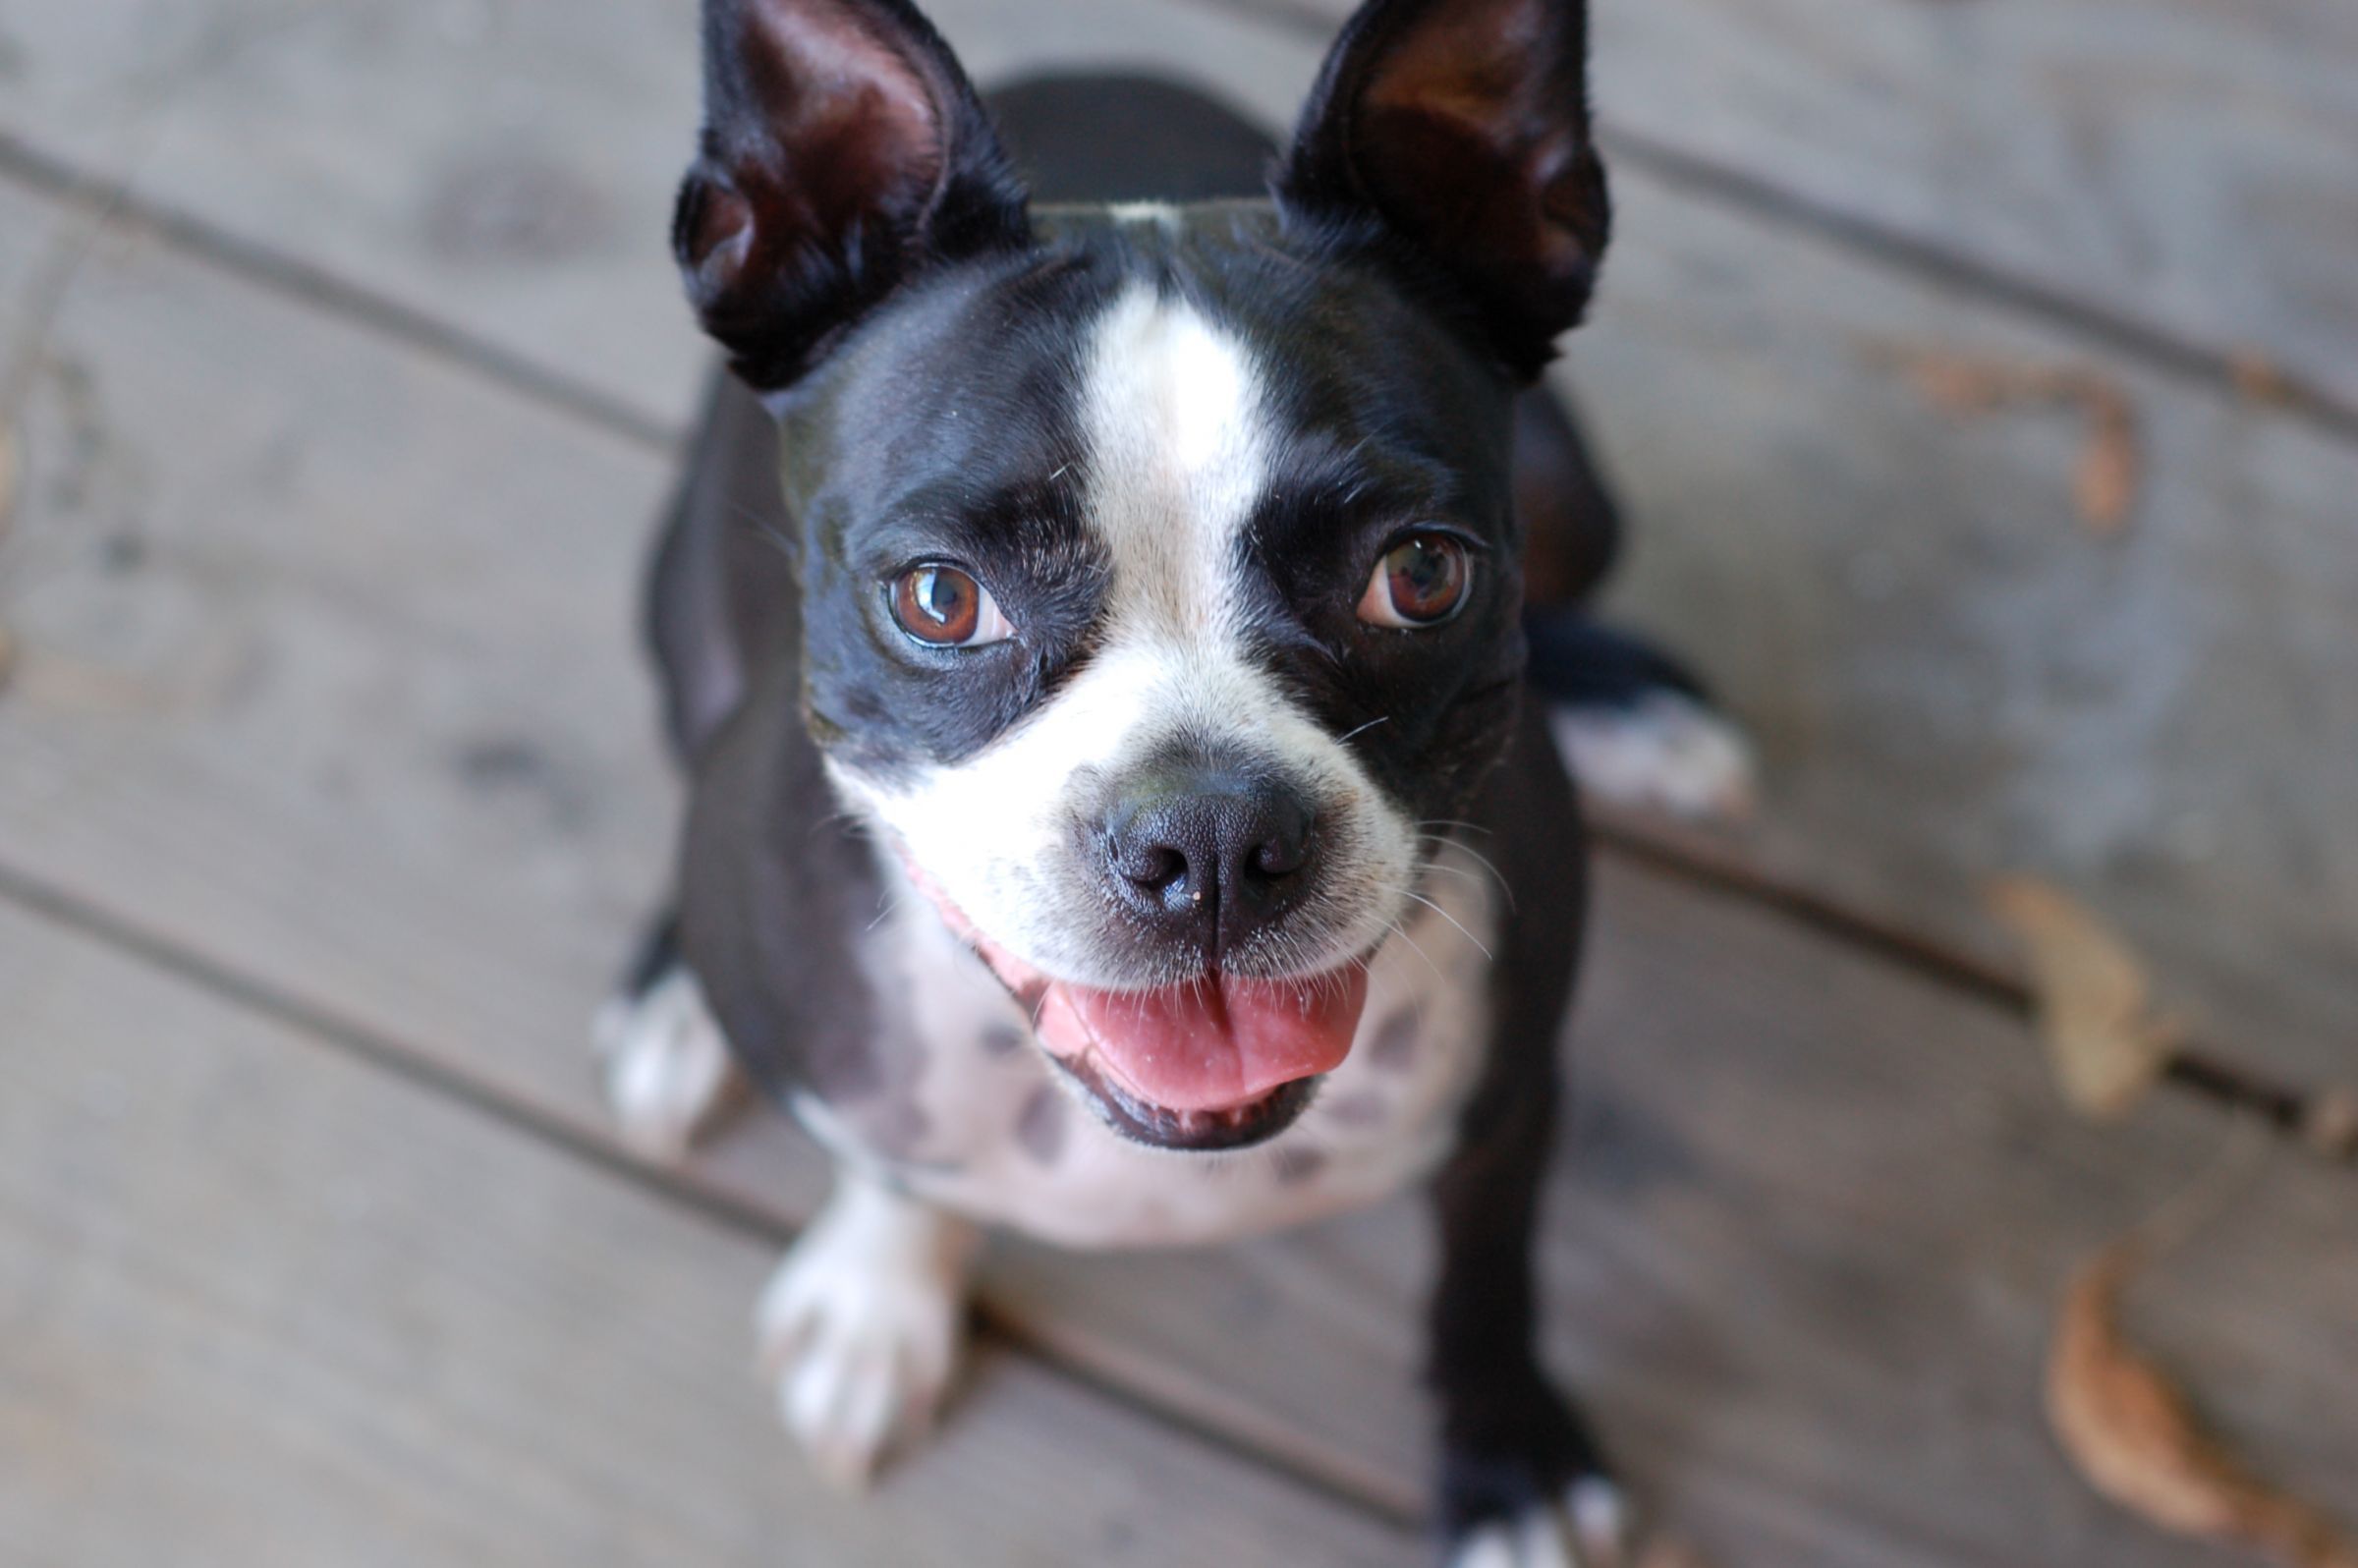 Boston Terrier Information - Dog Breeds at thepetowners